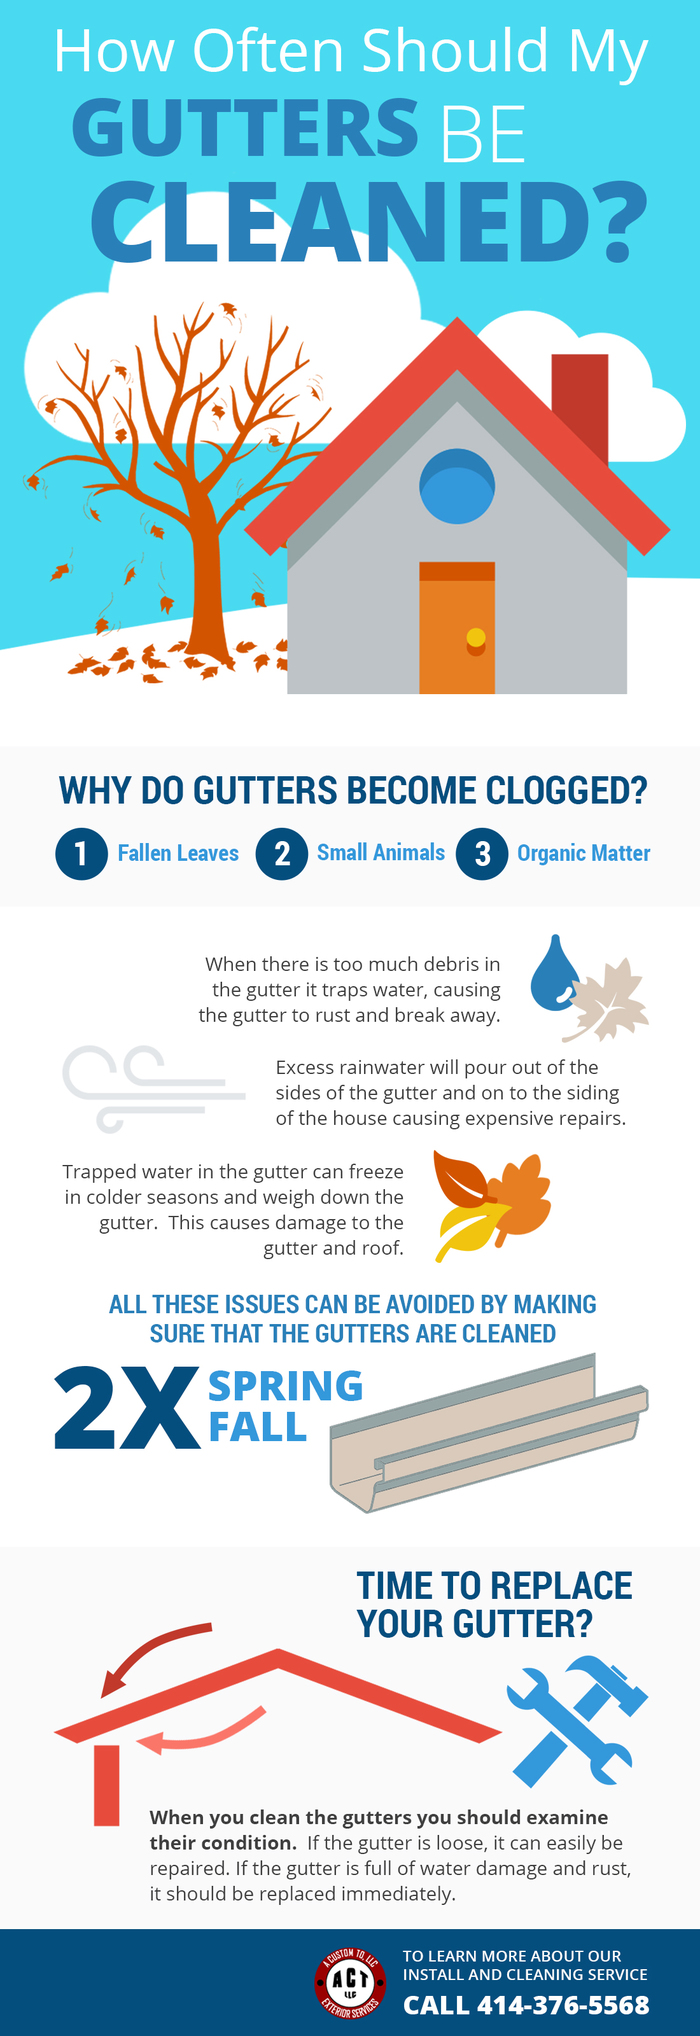 How Often Should My Gutters be Cleaned?